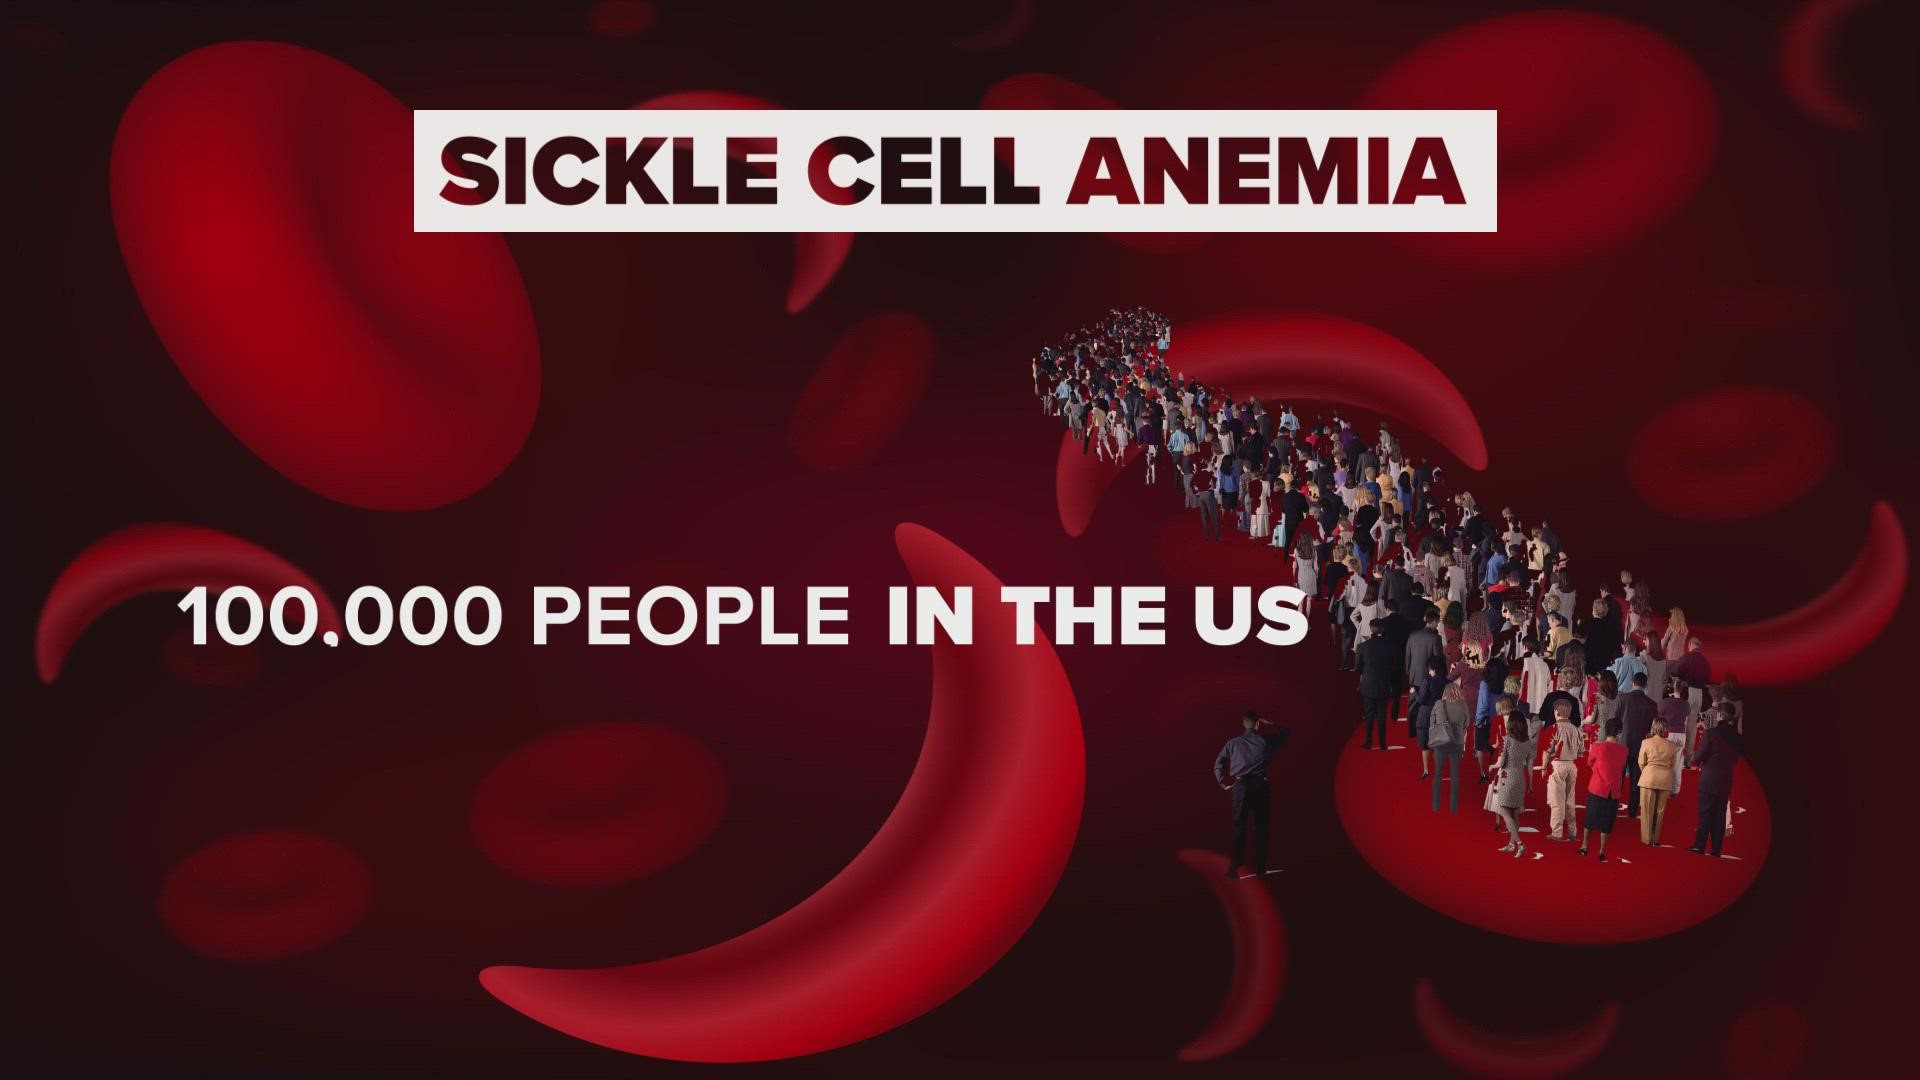 SCD is the most common inherited blood disorder in the U.S. and affects approximately 100,000 Americans.